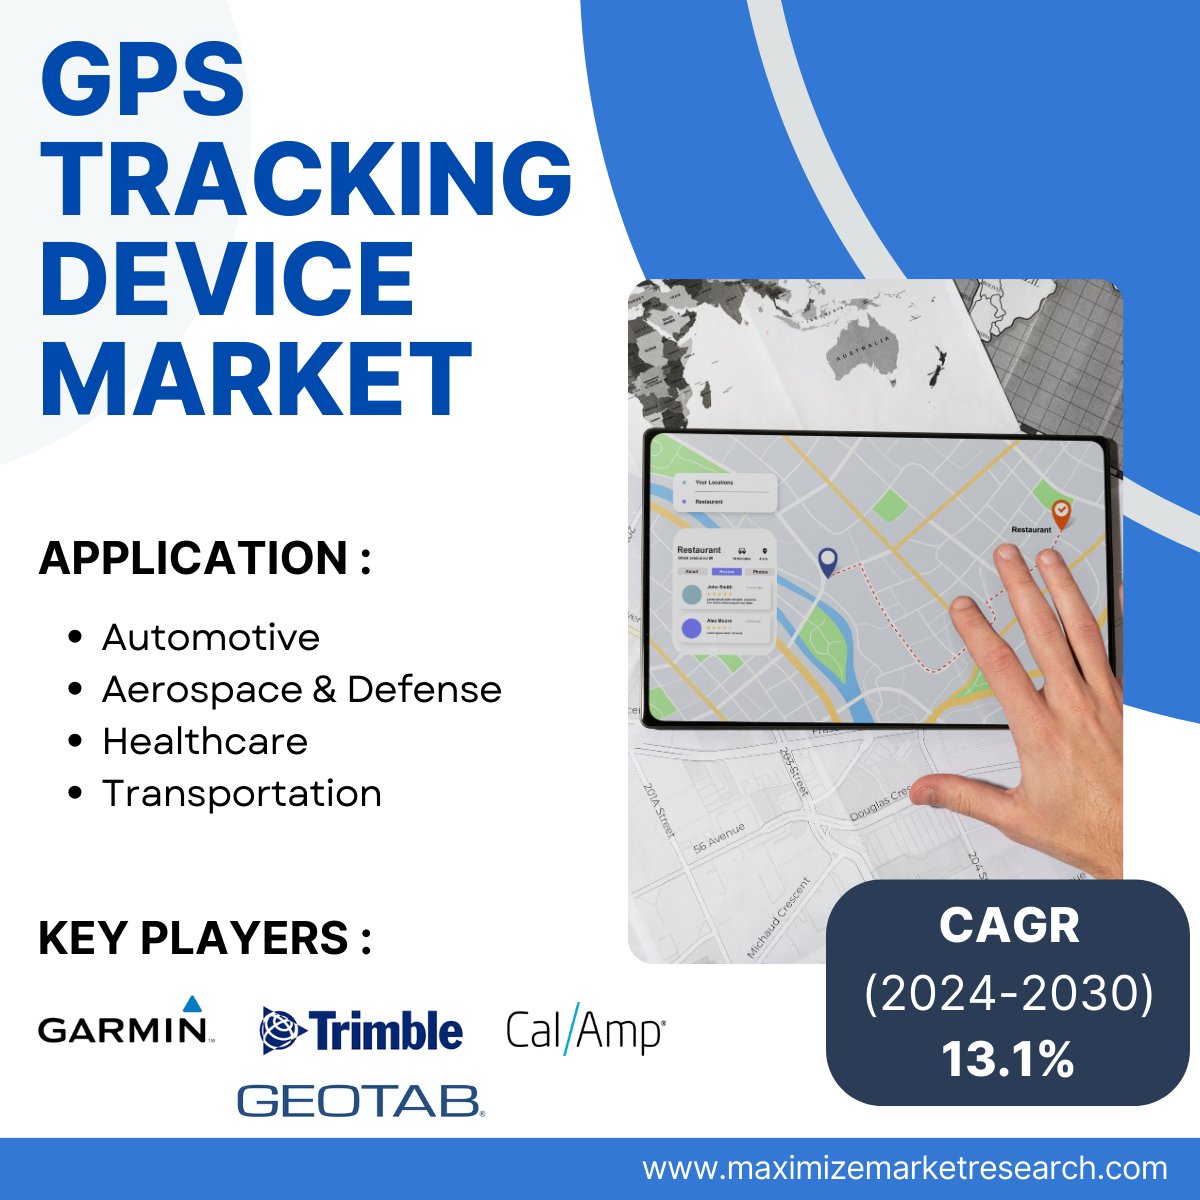 maximizemarketresearch.com/market-report/…

GPS Tracking Device Market Set to Reach USD 7.34 Billion by 2030! Explore the rise of location-based technology and its impact on industries worldwide. 

#maximizemarketresearch
#GPSTracking #LocationTechnology #MarketForecast #TechInnovation #FutureTrend